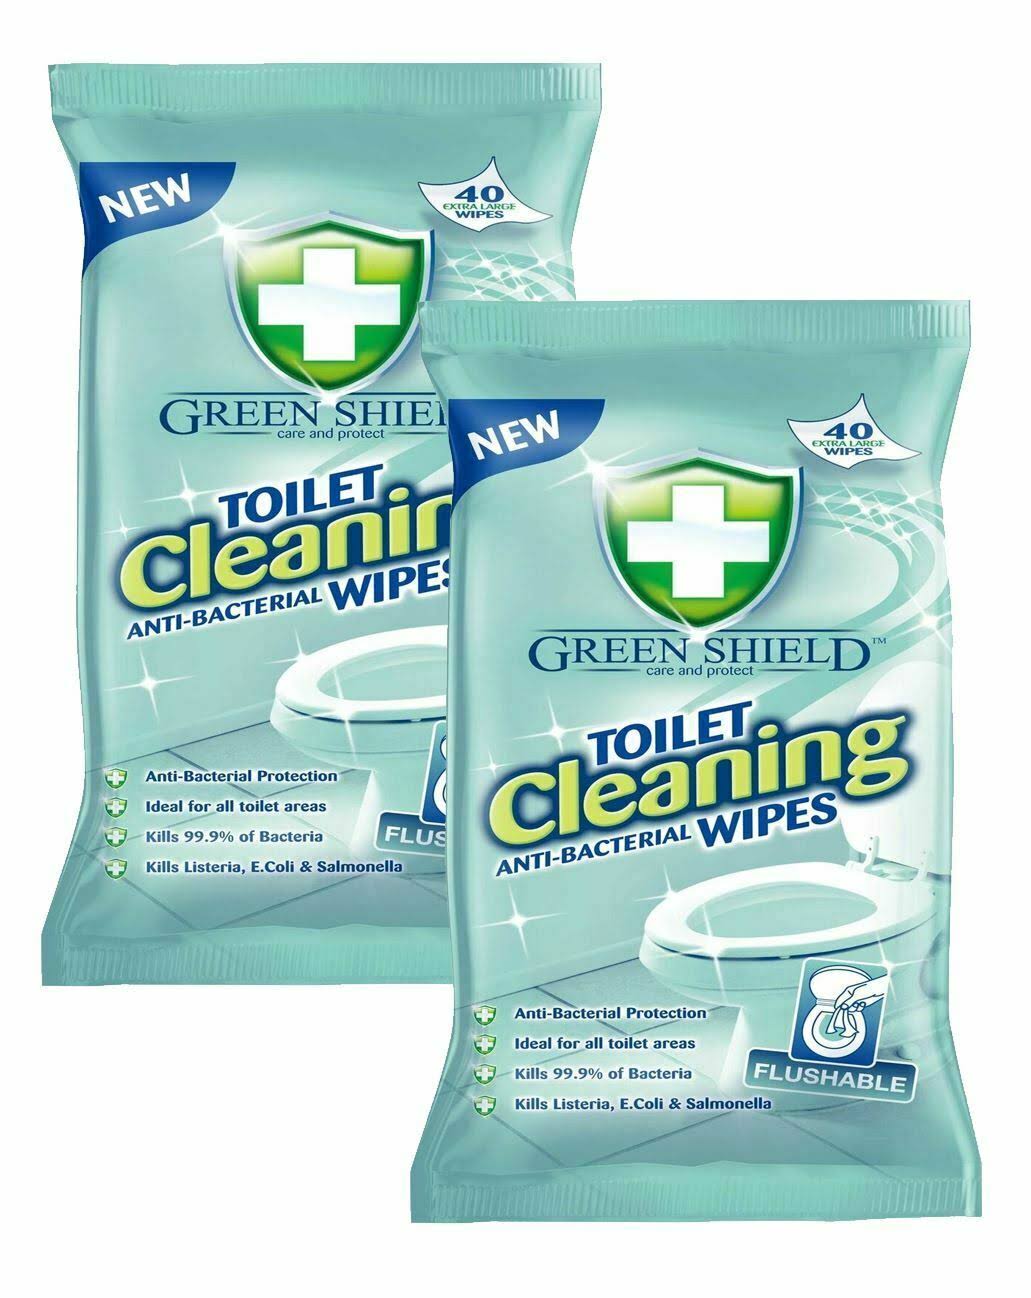 Green Shield Toilet Cleaning Anti-Bacterial Wipes